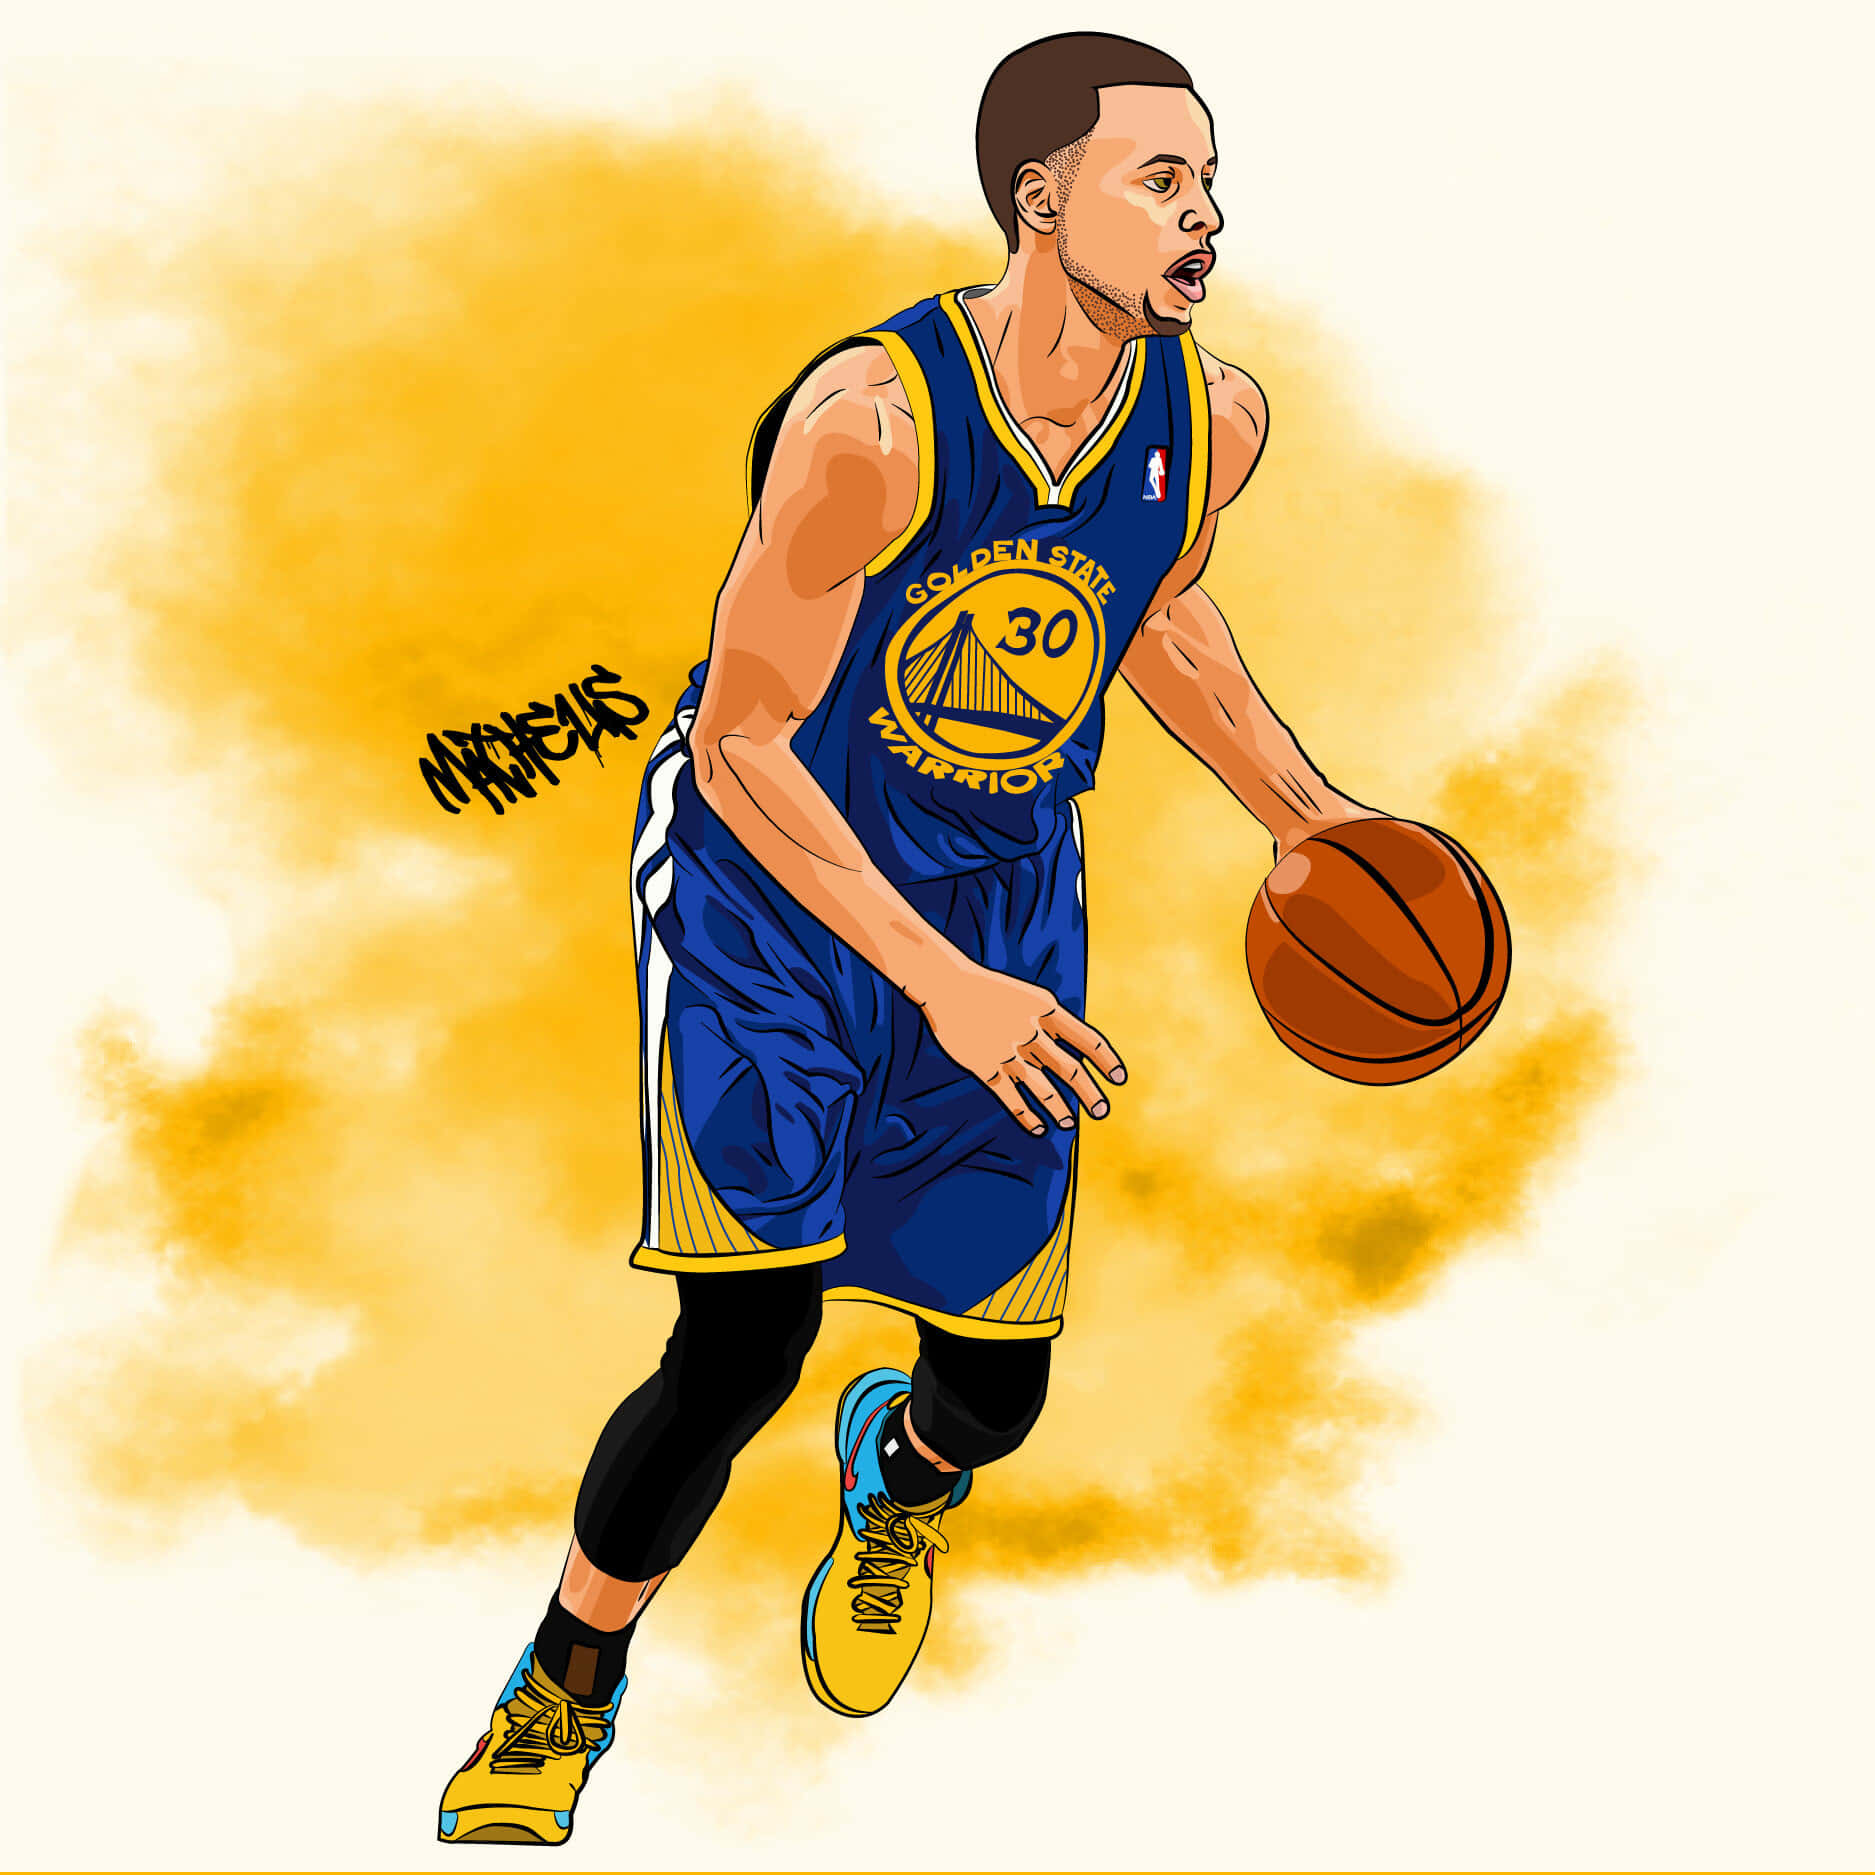 Stephen Curry Flicking the Ball Through the Basketball Hoop Wallpaper